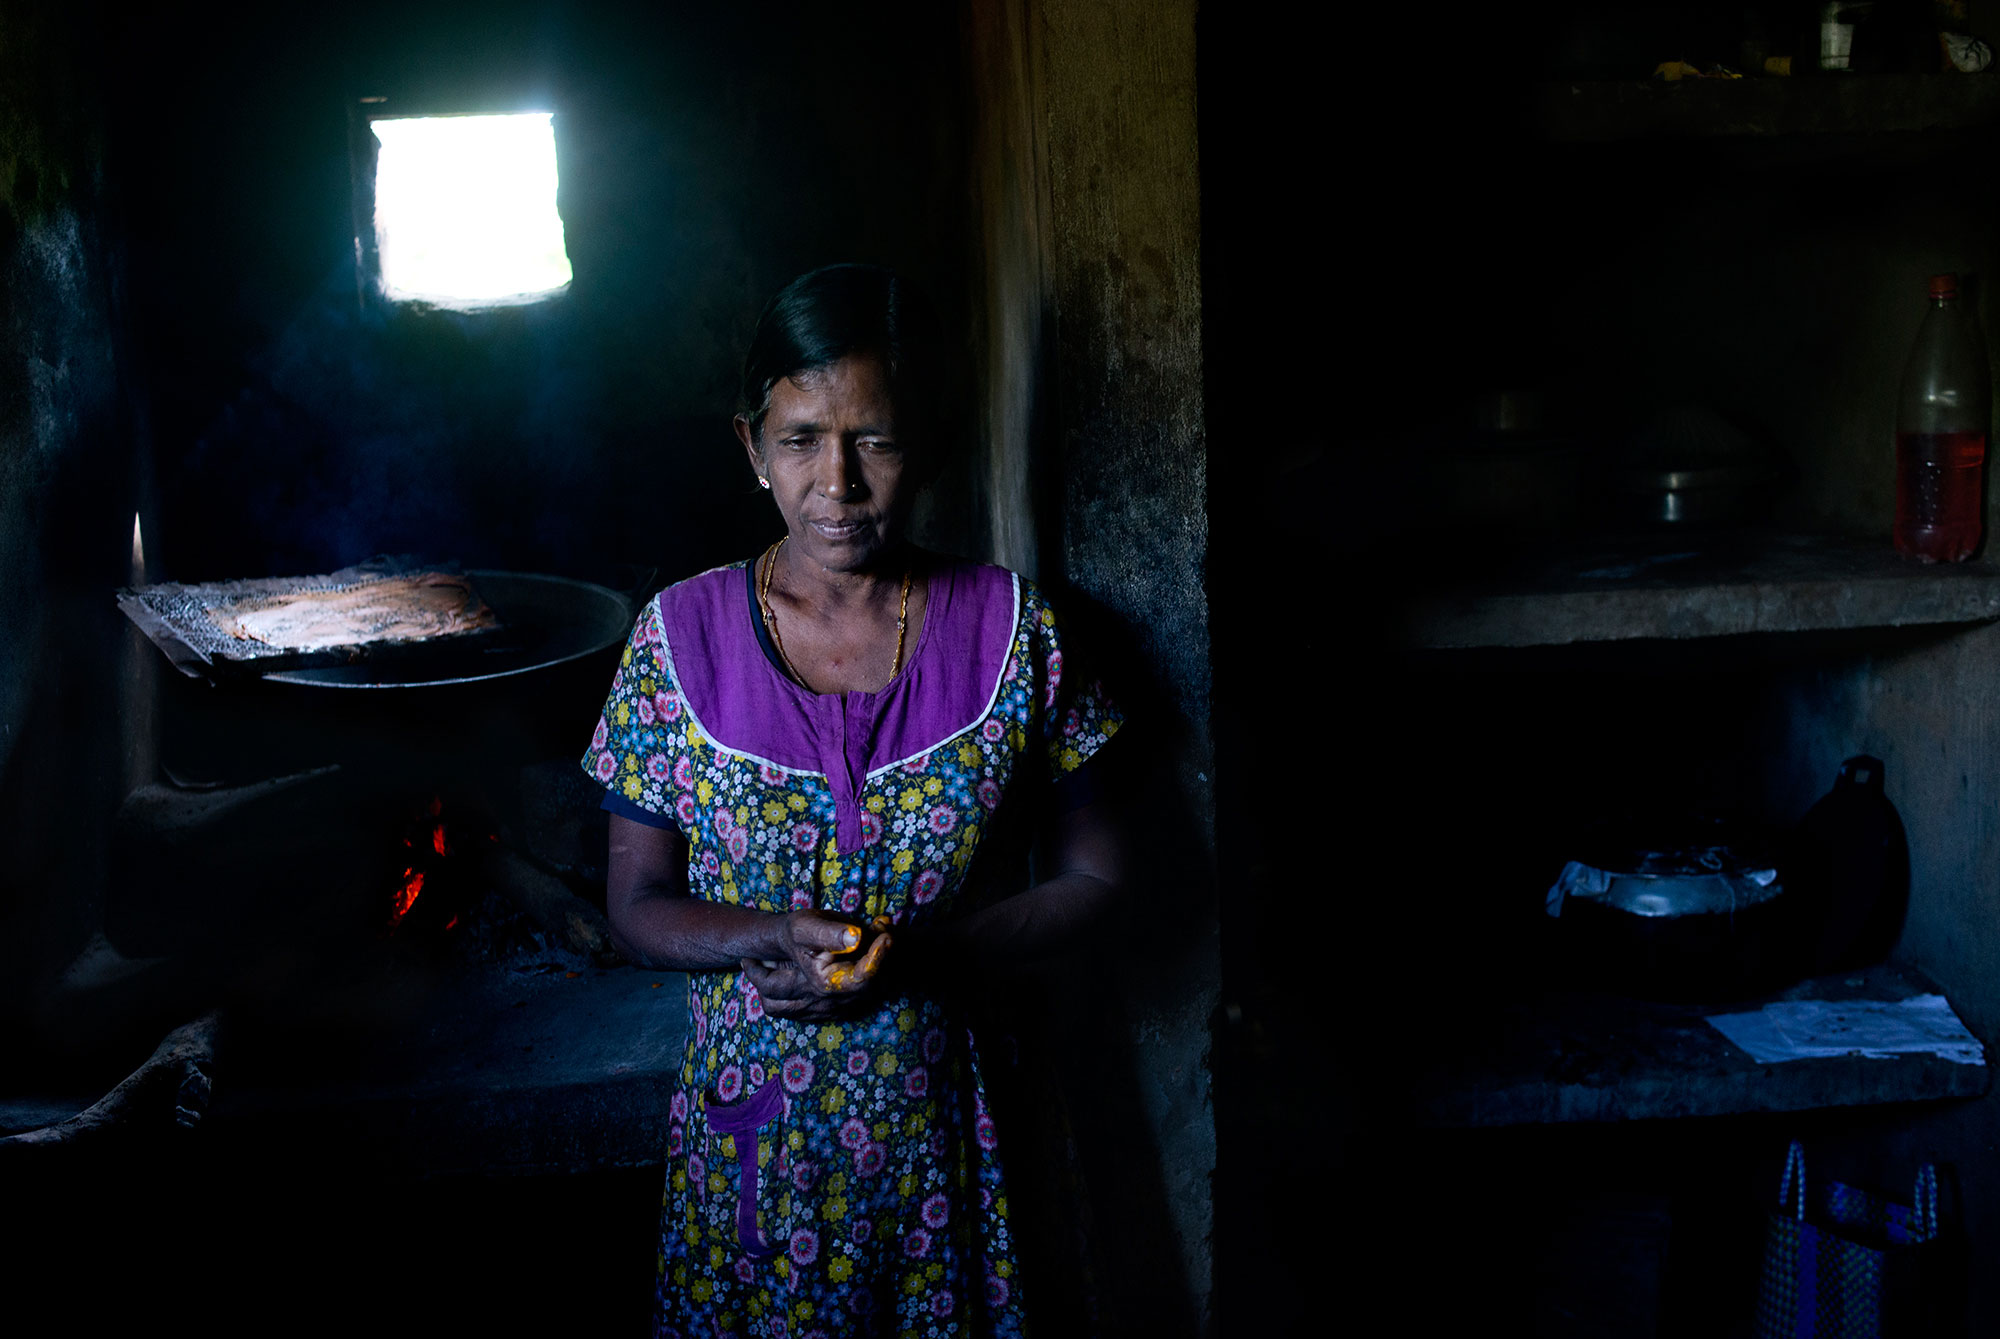 Kunarathiram Soba has suffered from heart problems since her husband was killed during the war. Like many widows, she still wears a bindi, a red dot on her forehead to indicate that she is married, because she fears being raped or attacked otherwise. 'Rapists fear revenge [from a husband],' she explains. 